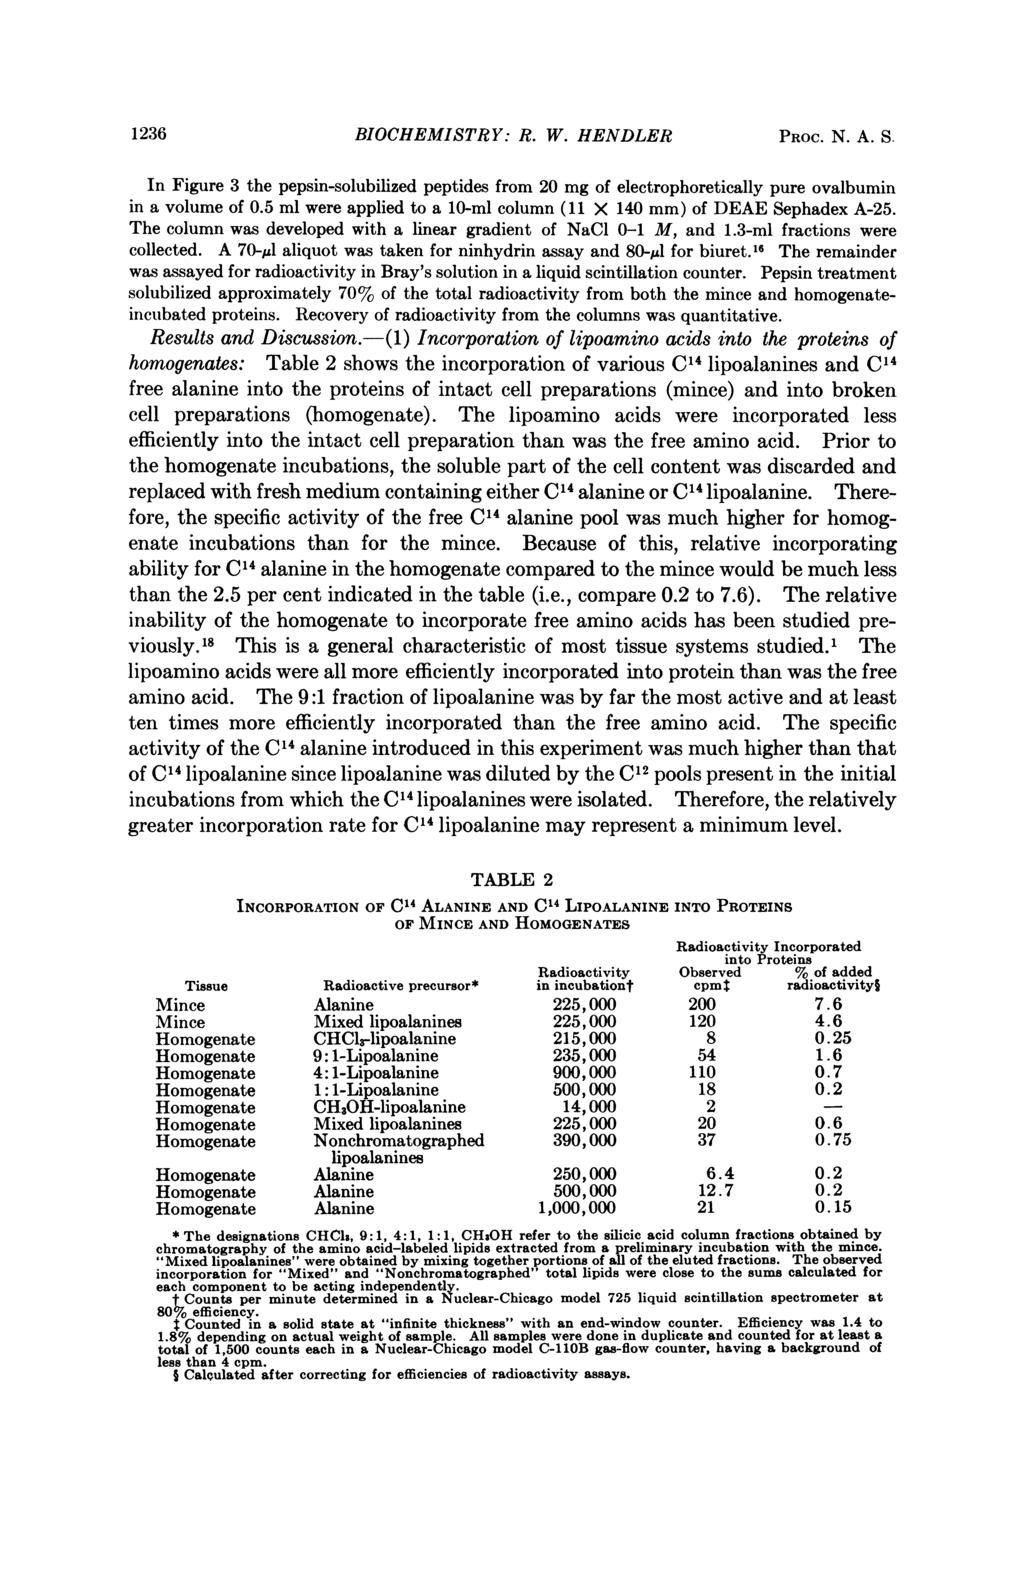 1236 BIOCHEMISTRY: R. W. HENDLER PROC. N. A. S. In Figure 3 the pepsin-solubilized peptides from 20 mg of electrophoretically pure ovalbumin in a volume of 0.